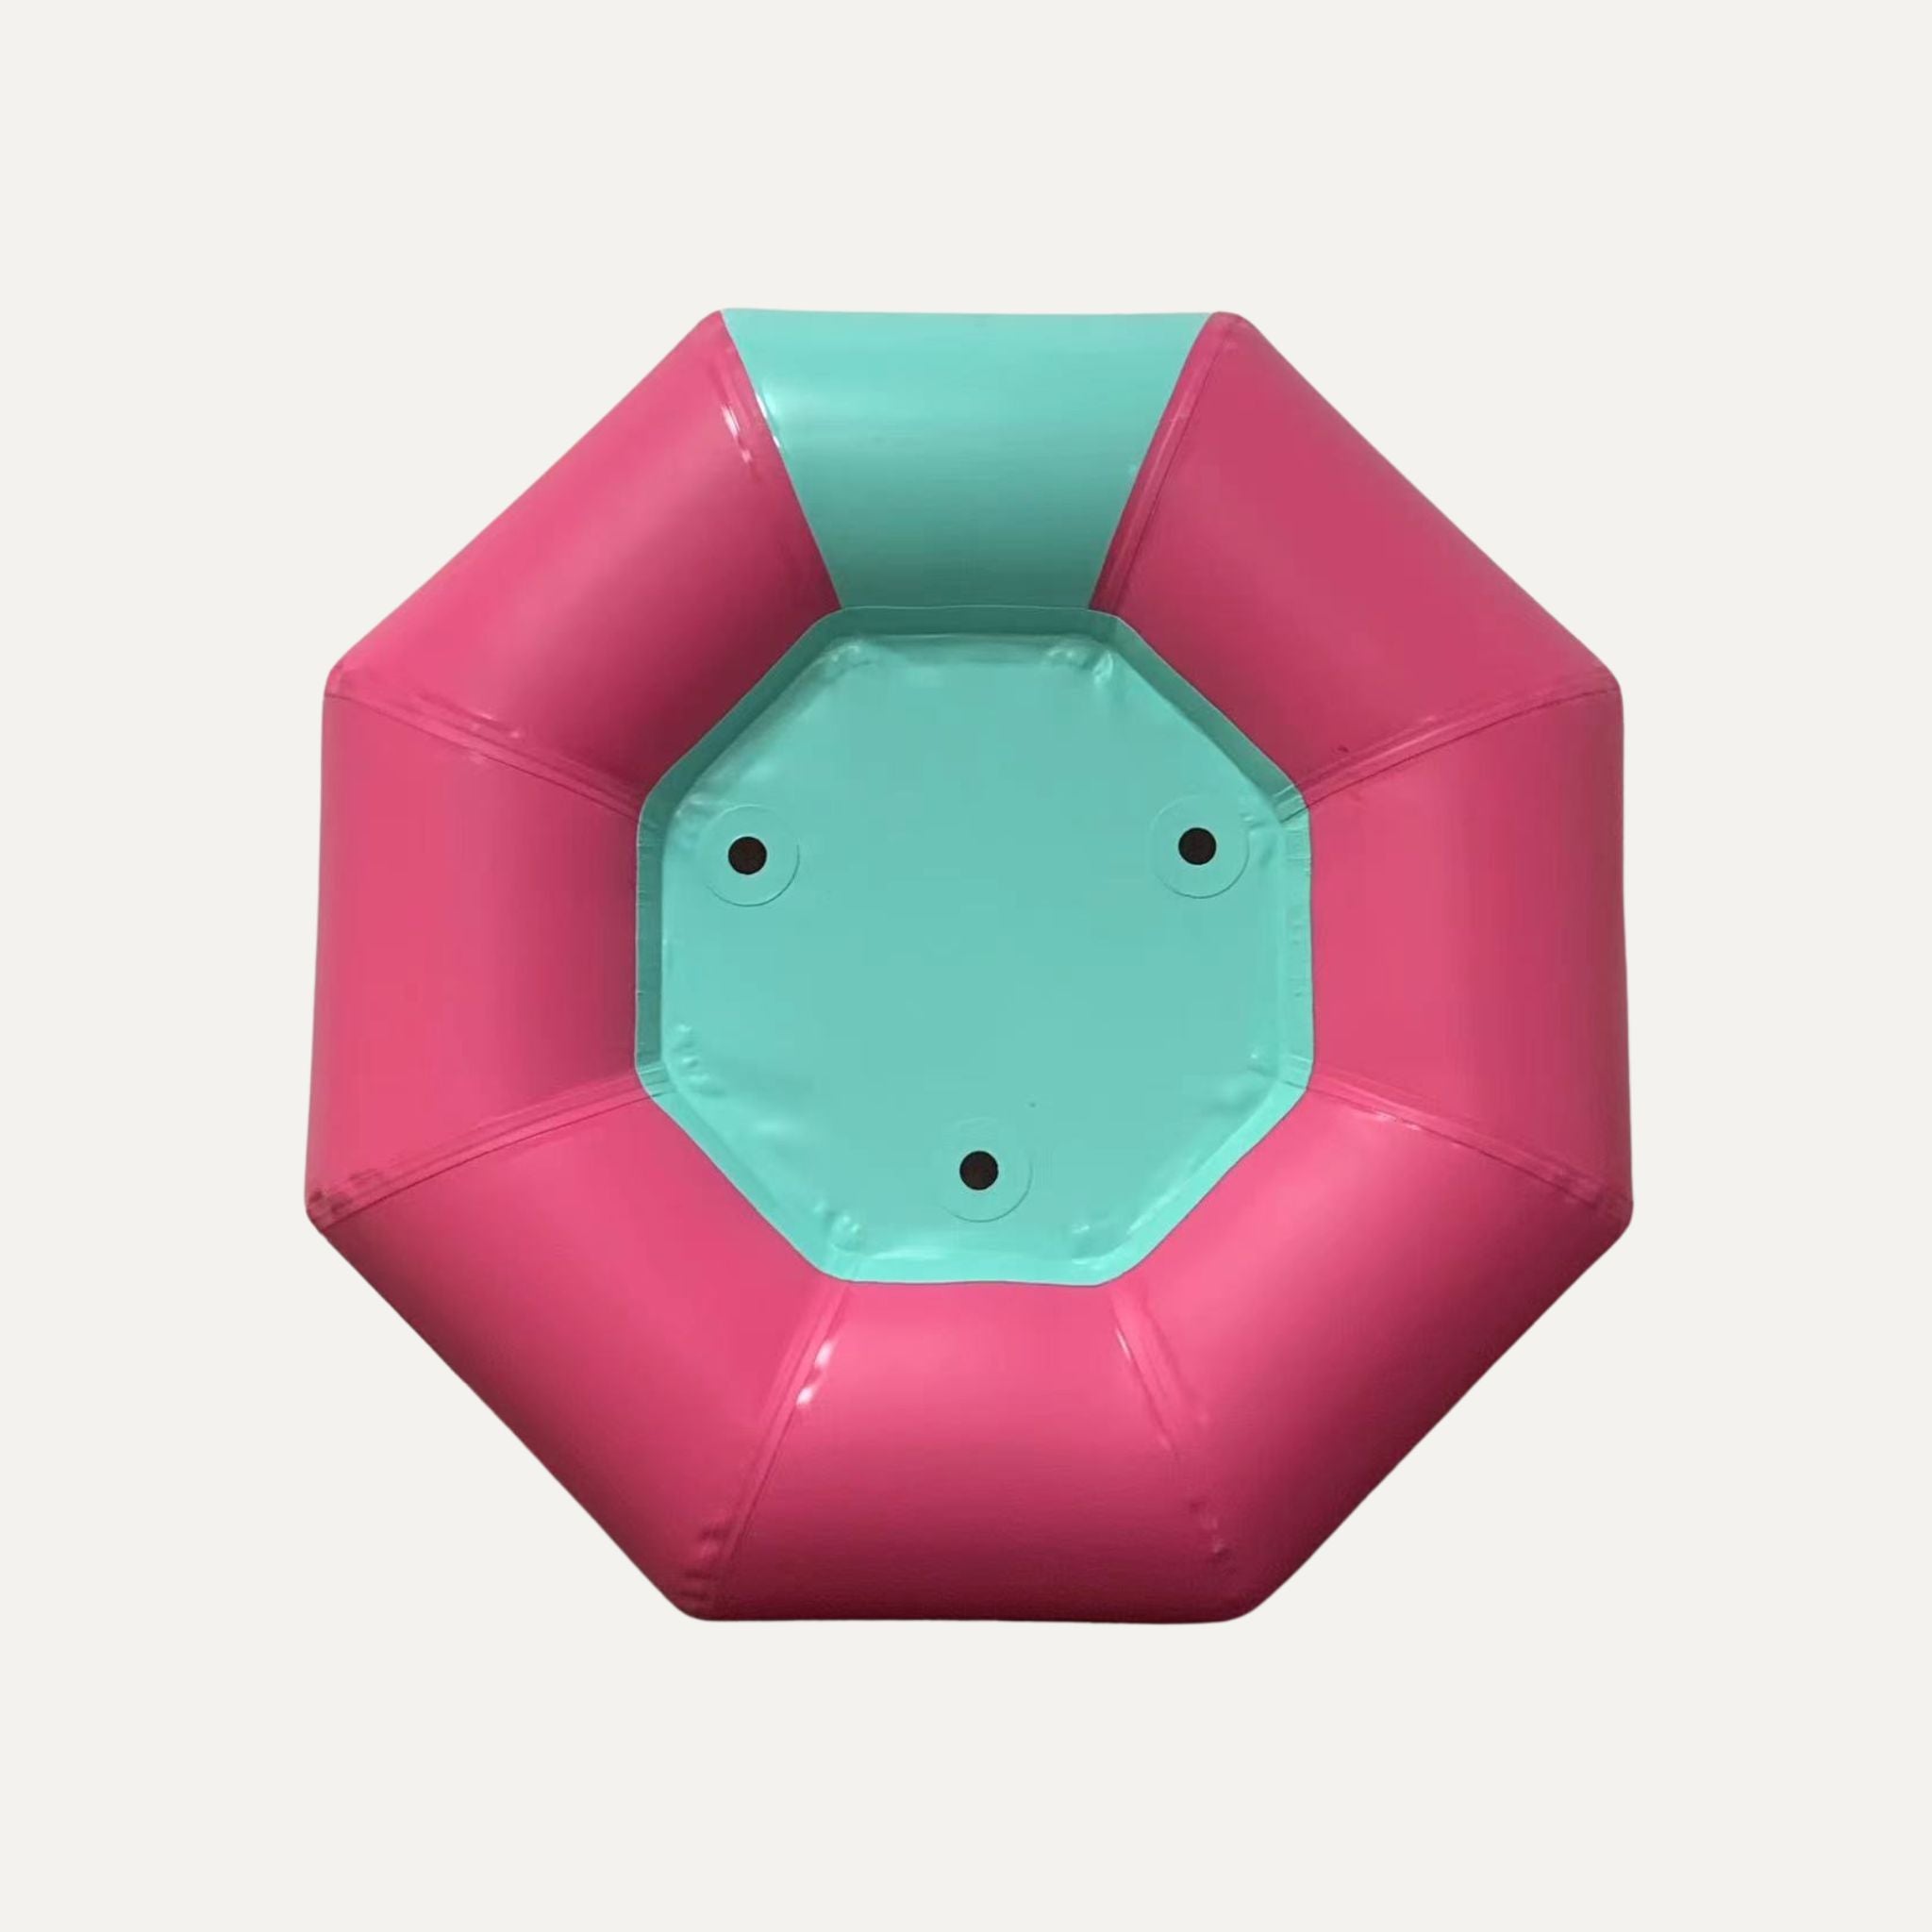 Single SOLtube inflatable in pink and teal, viewed from the bottom.